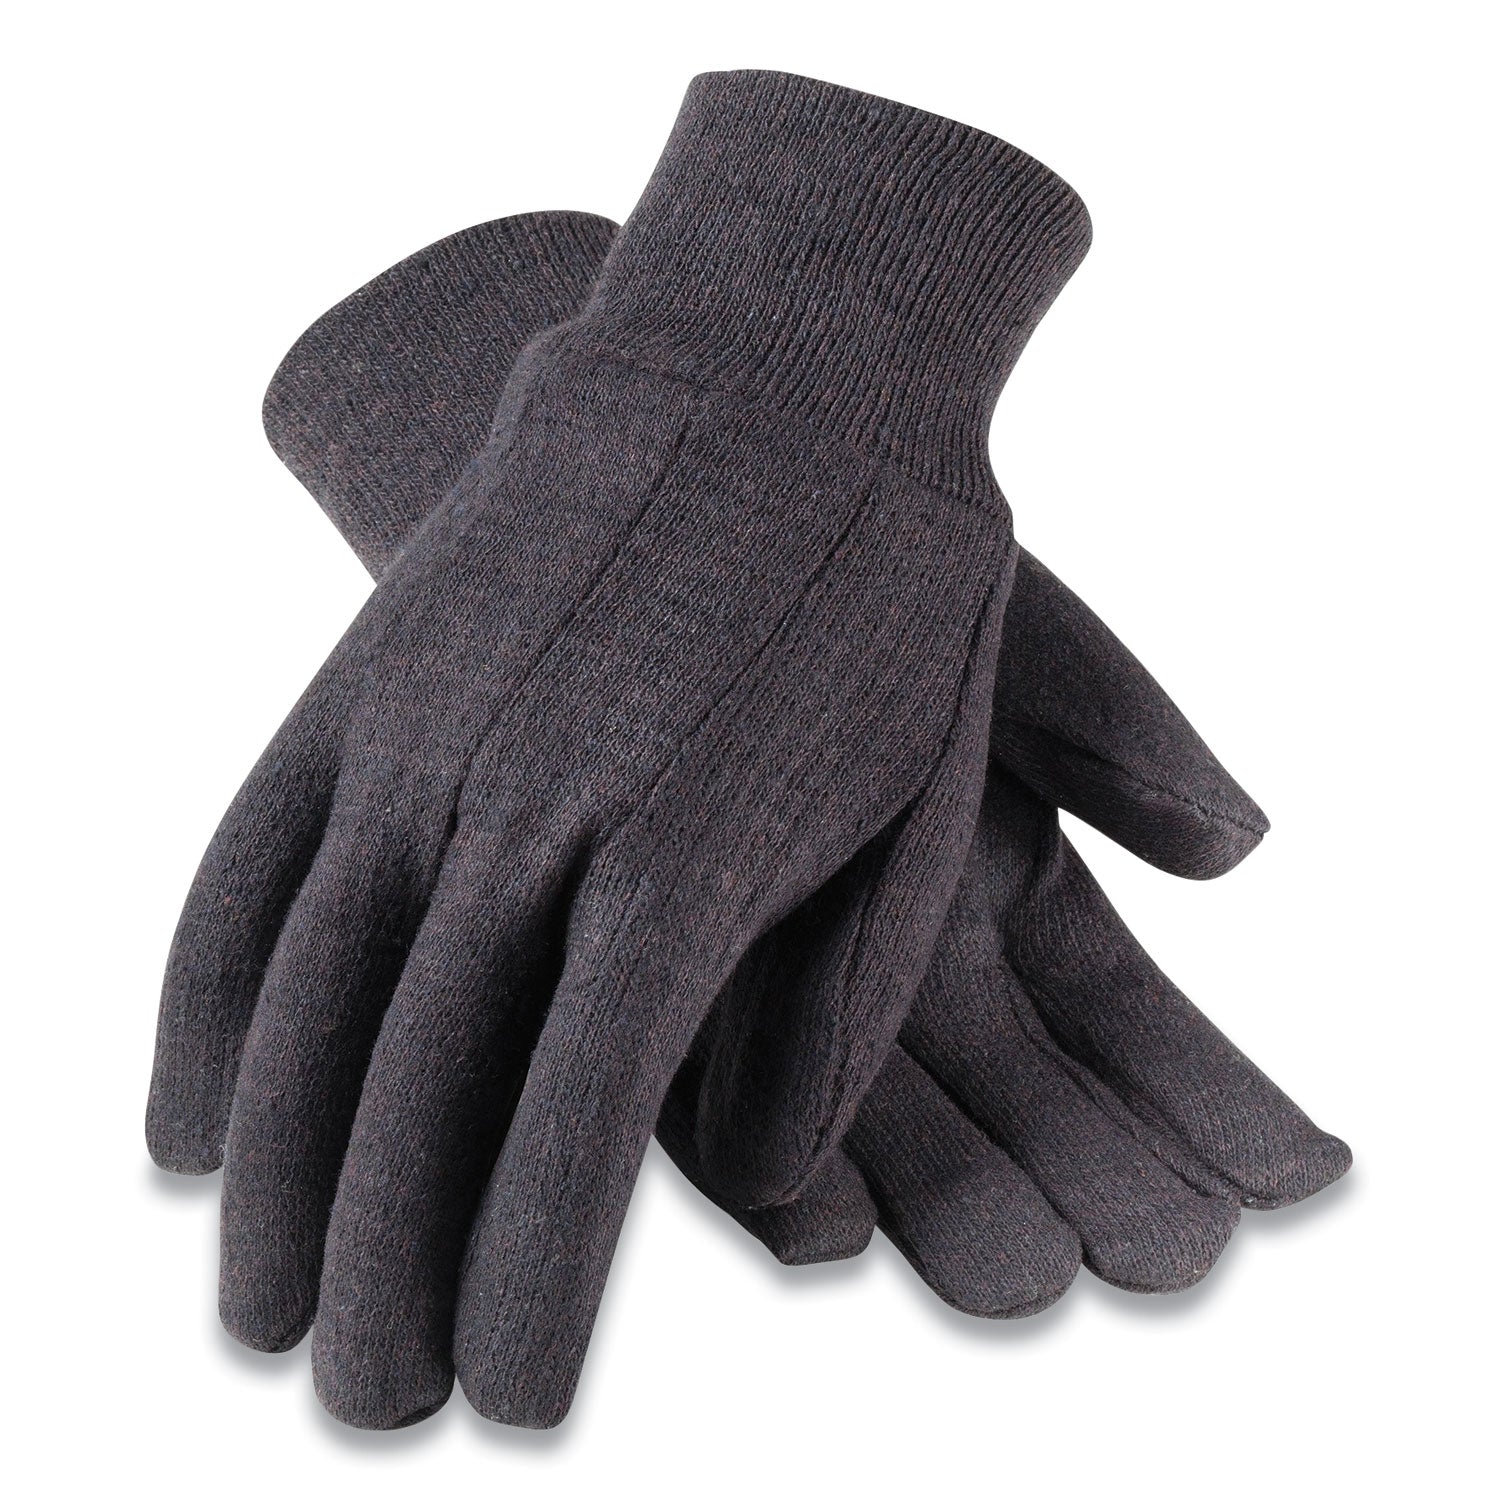 polyester-cotton-jersey-gloves-mens-brown-12-pairs_pid95806 - 1